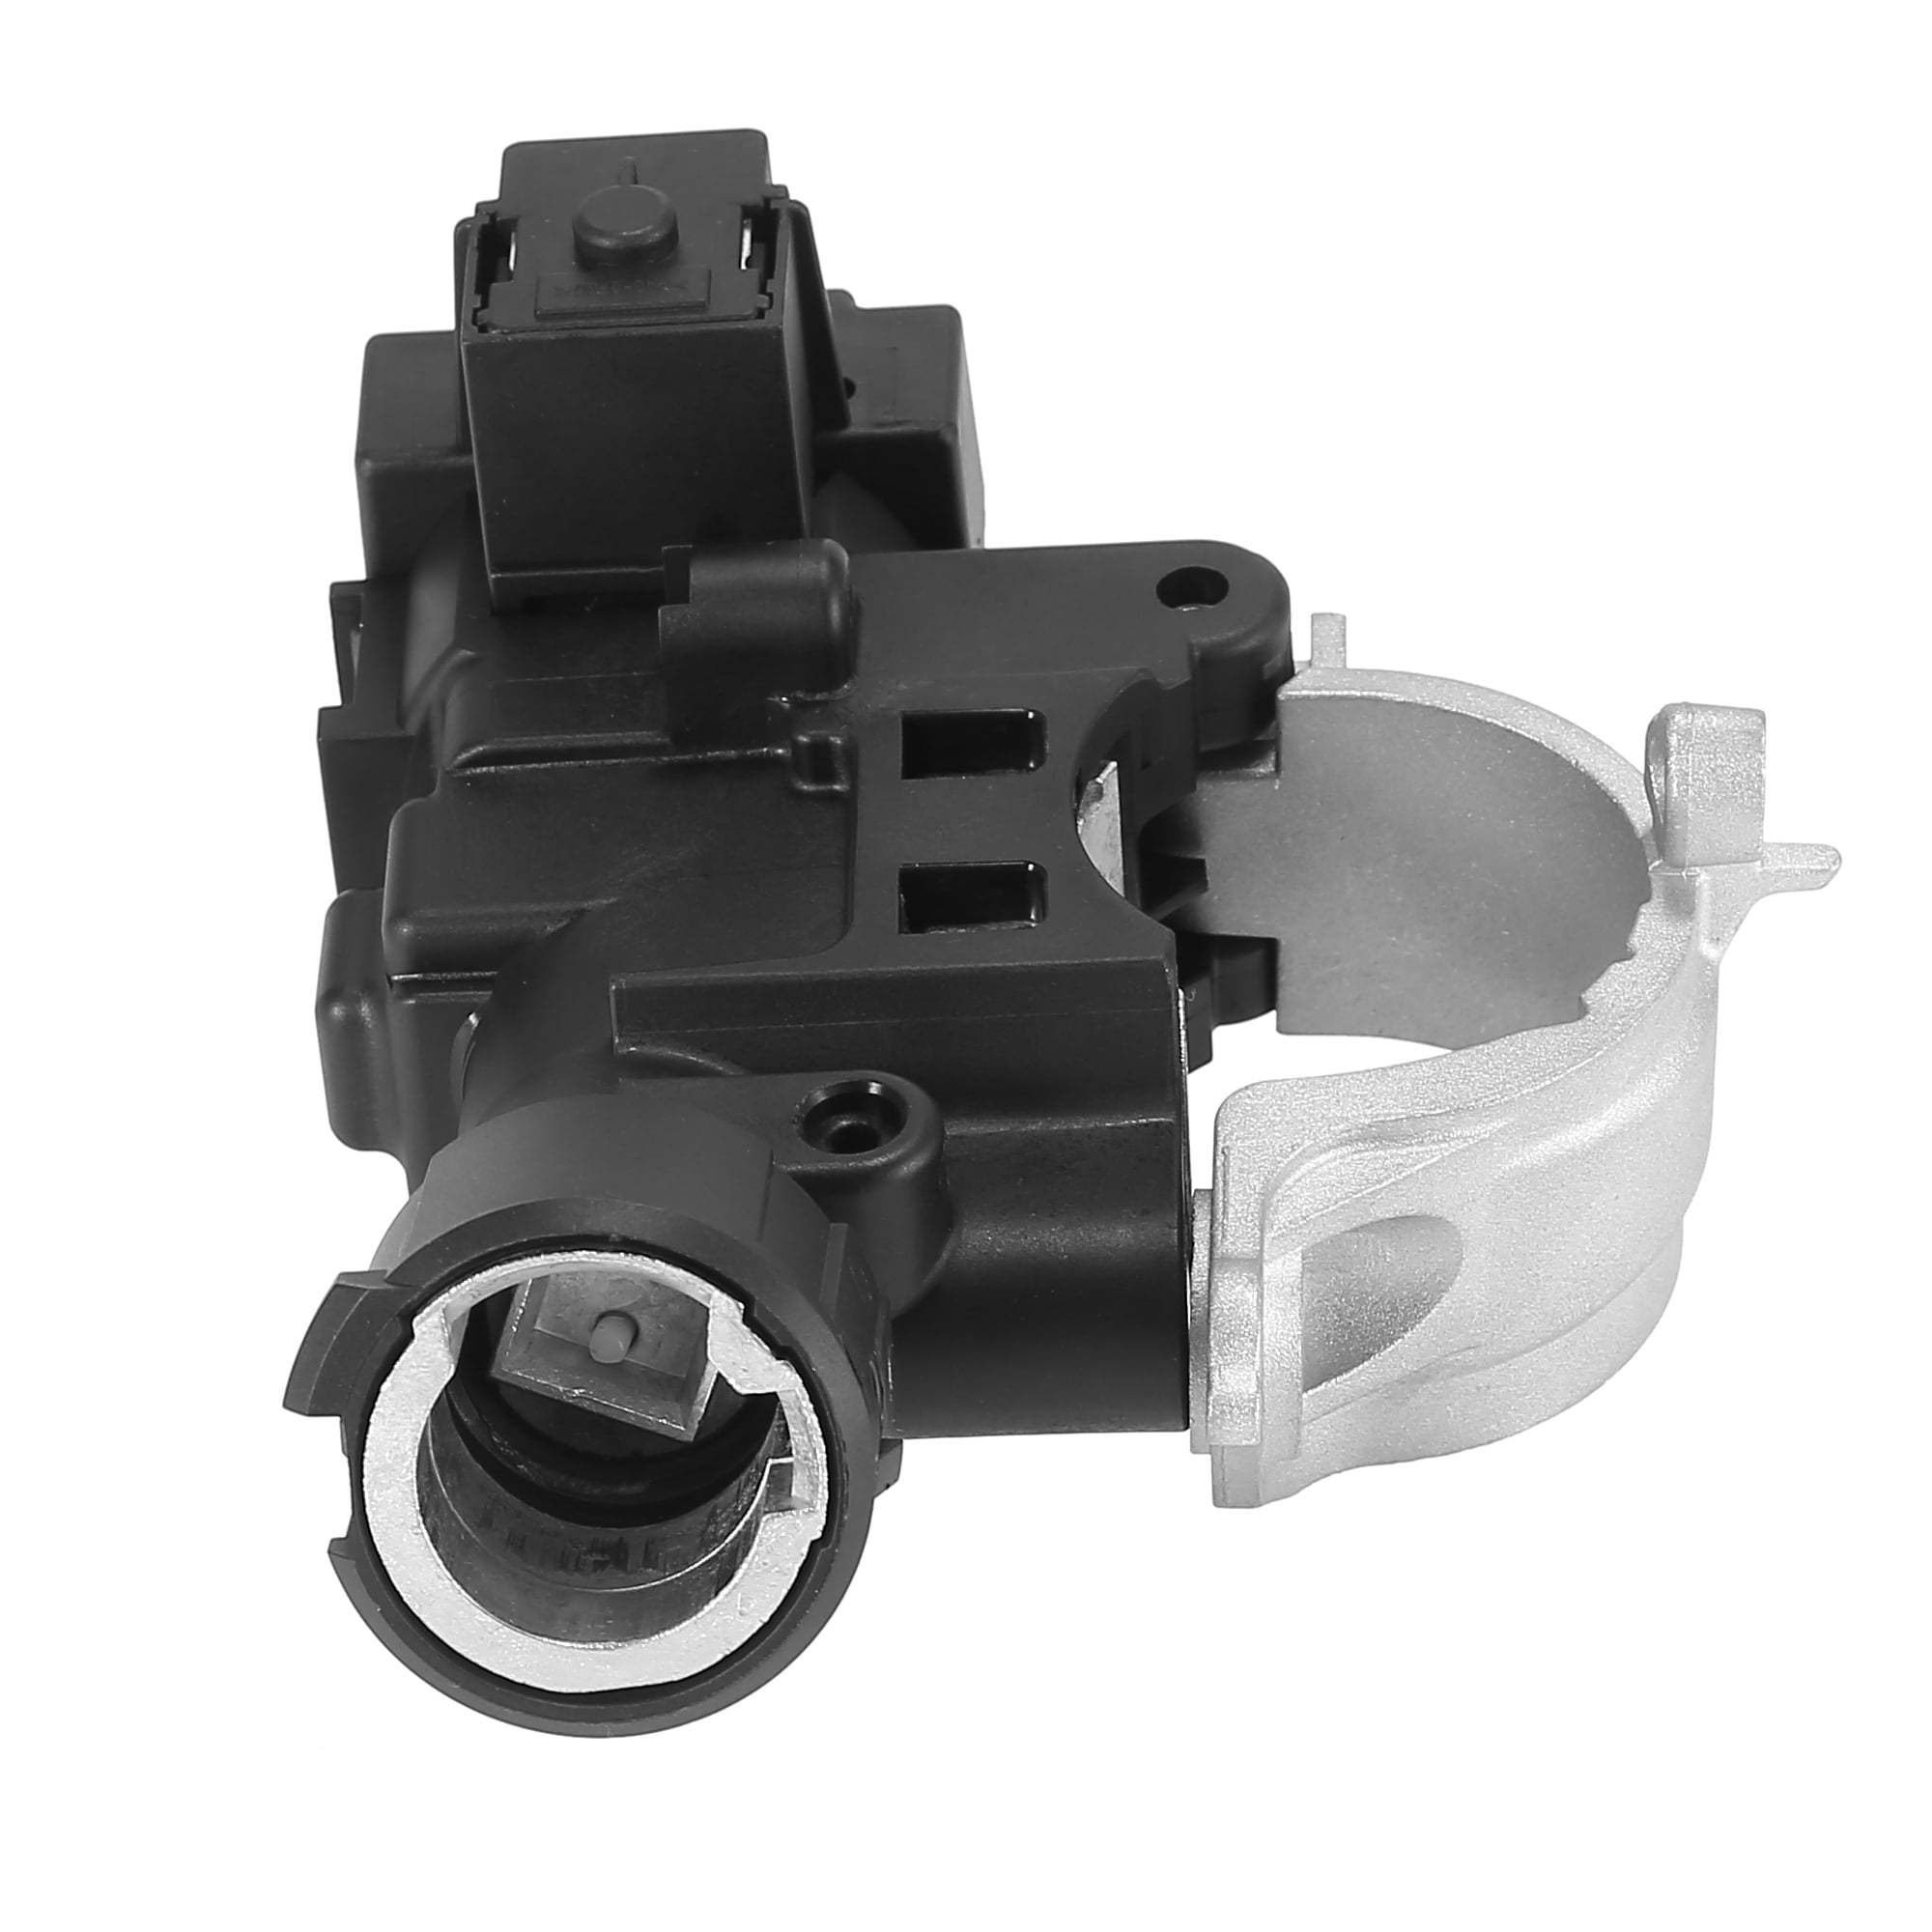 USTAR Ignition Lock Housing Compatible with Ford Escape Focus Mazda Tribute Mercury Mariner 2008-2011 Replaces 989-019 9L8Z-3511-A ZZCB66160 